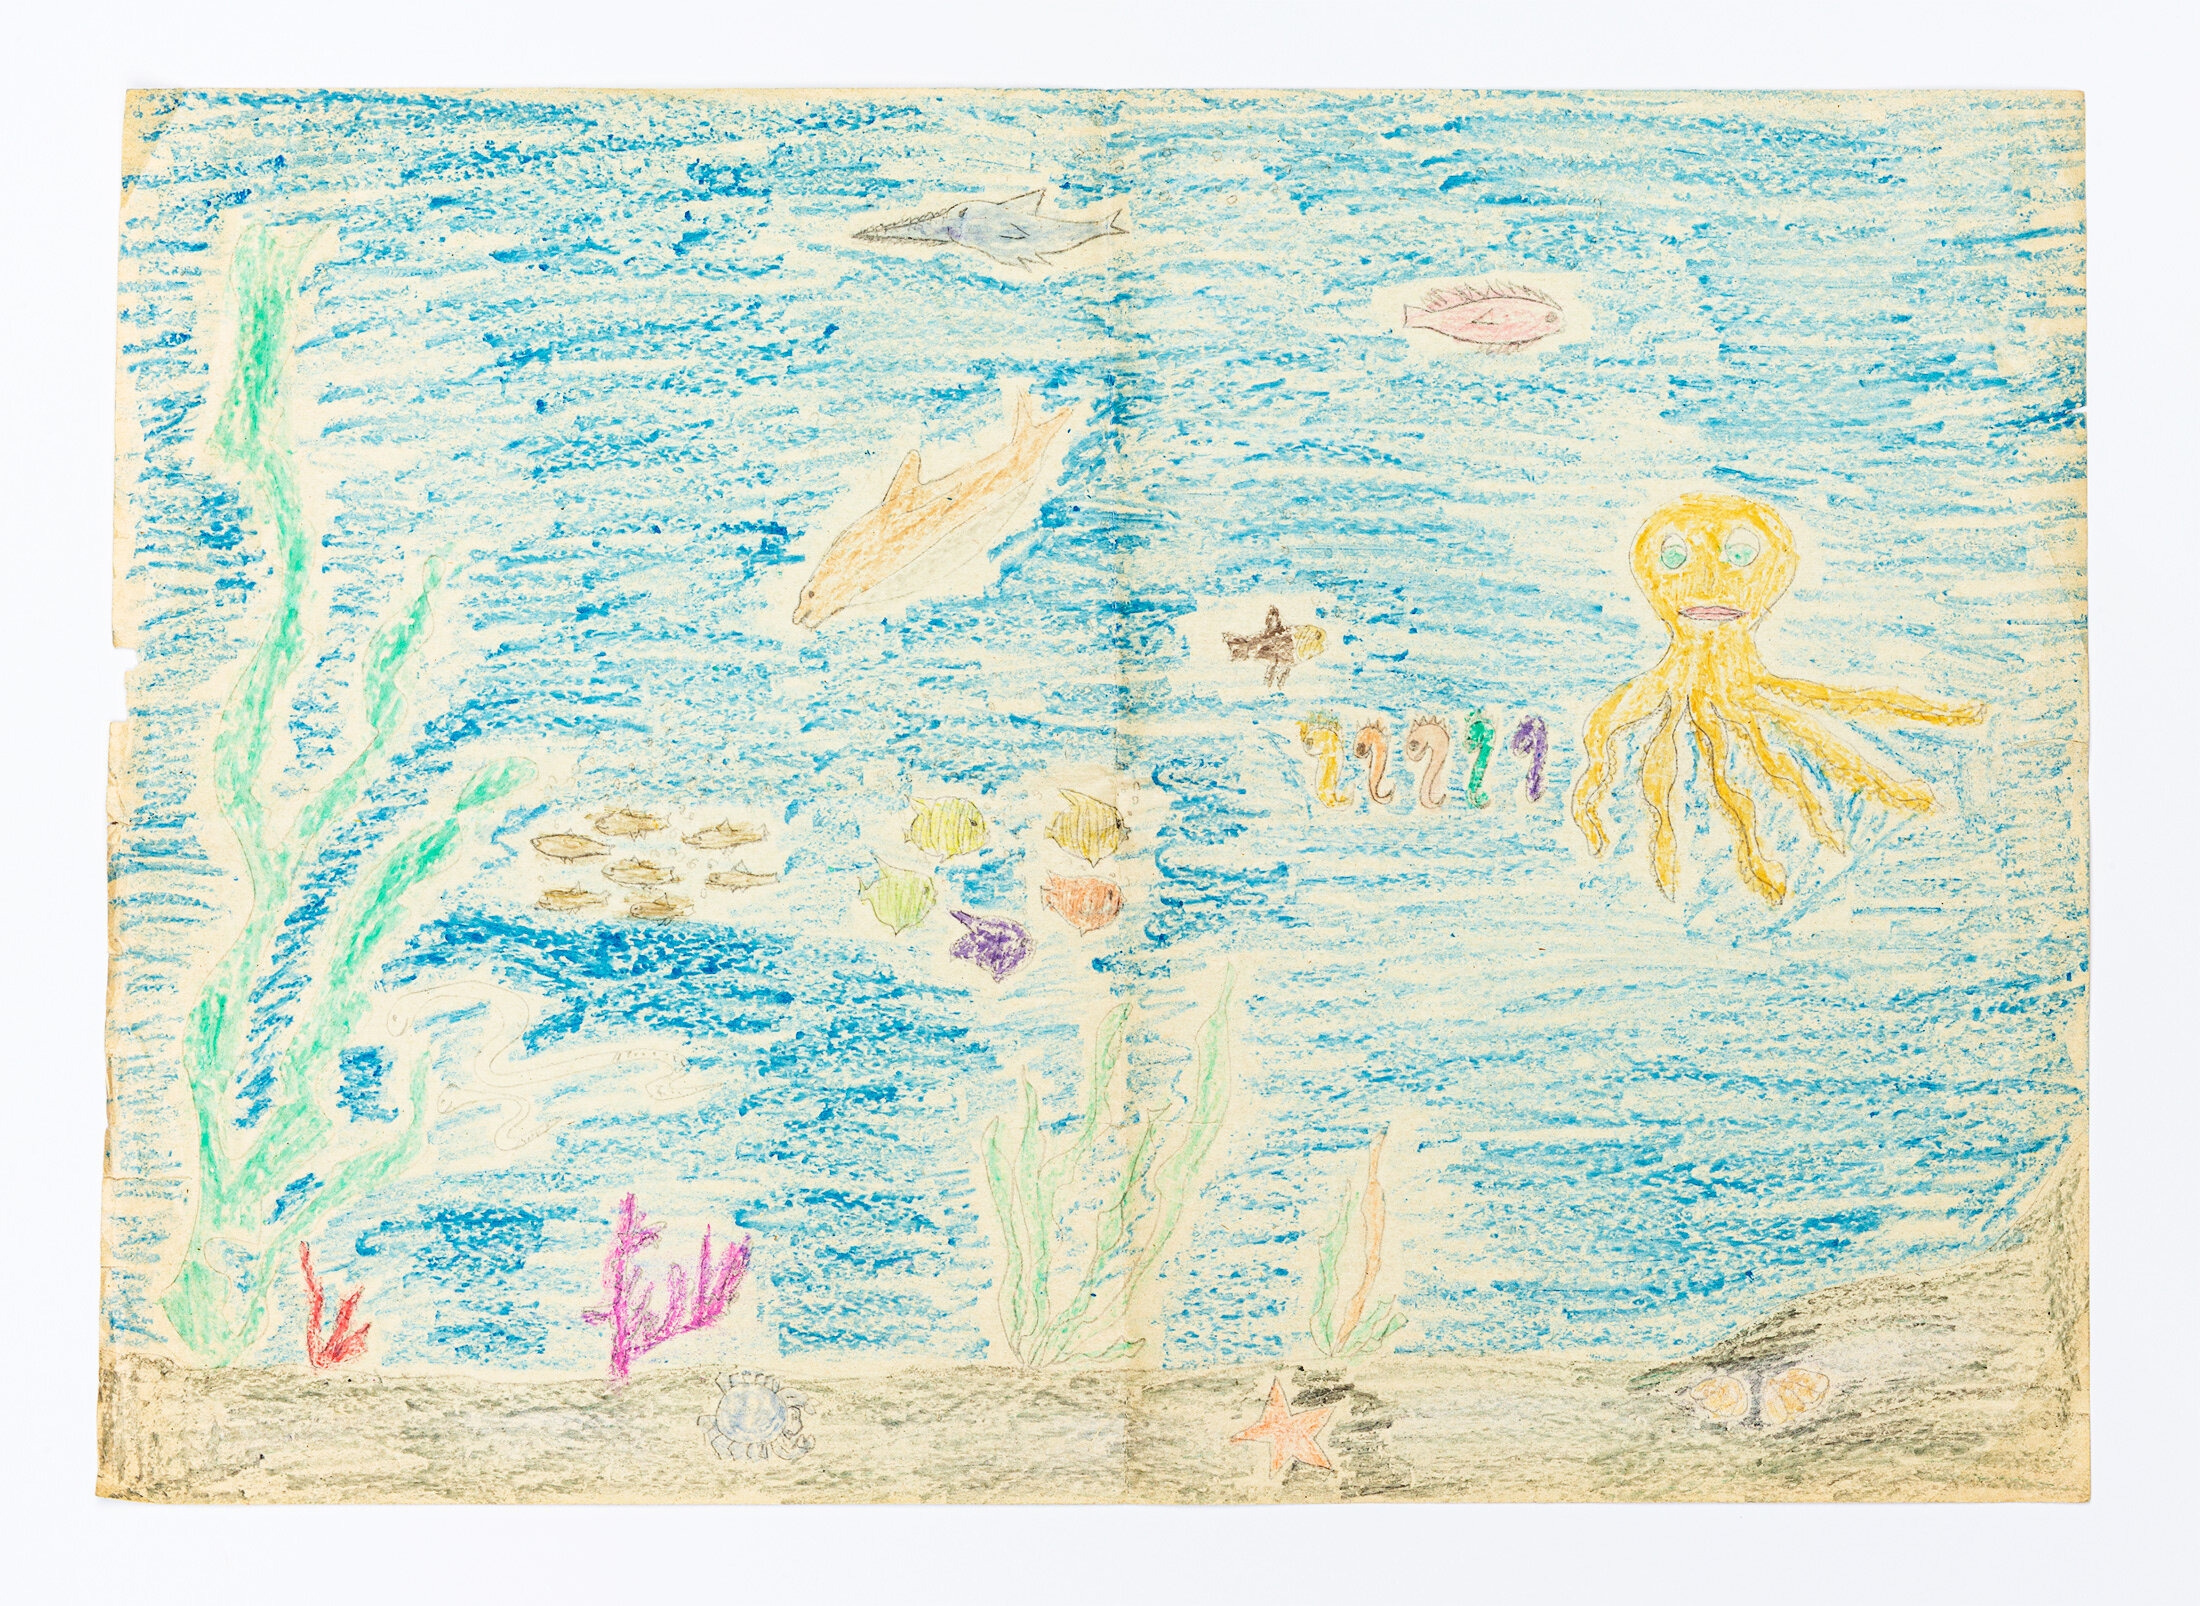 Underwater World, 1995 - wax crayons on printing paper